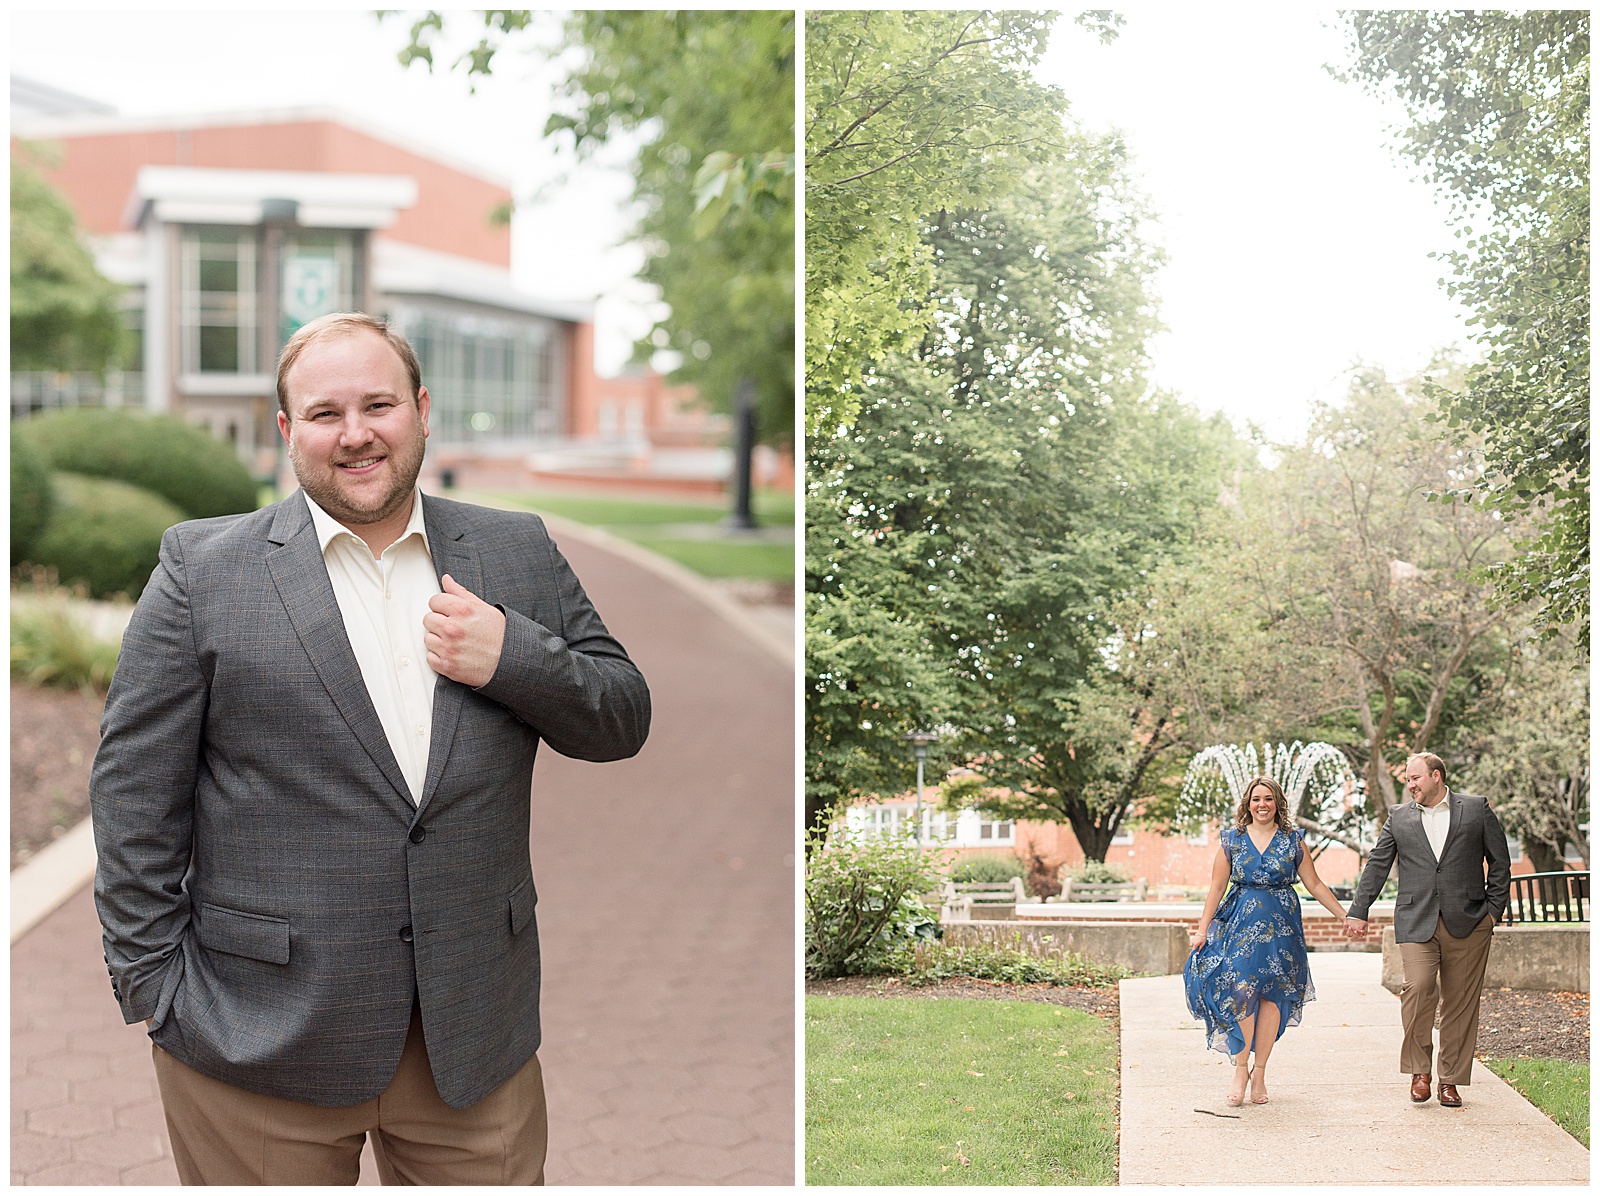 Engagement session at York College